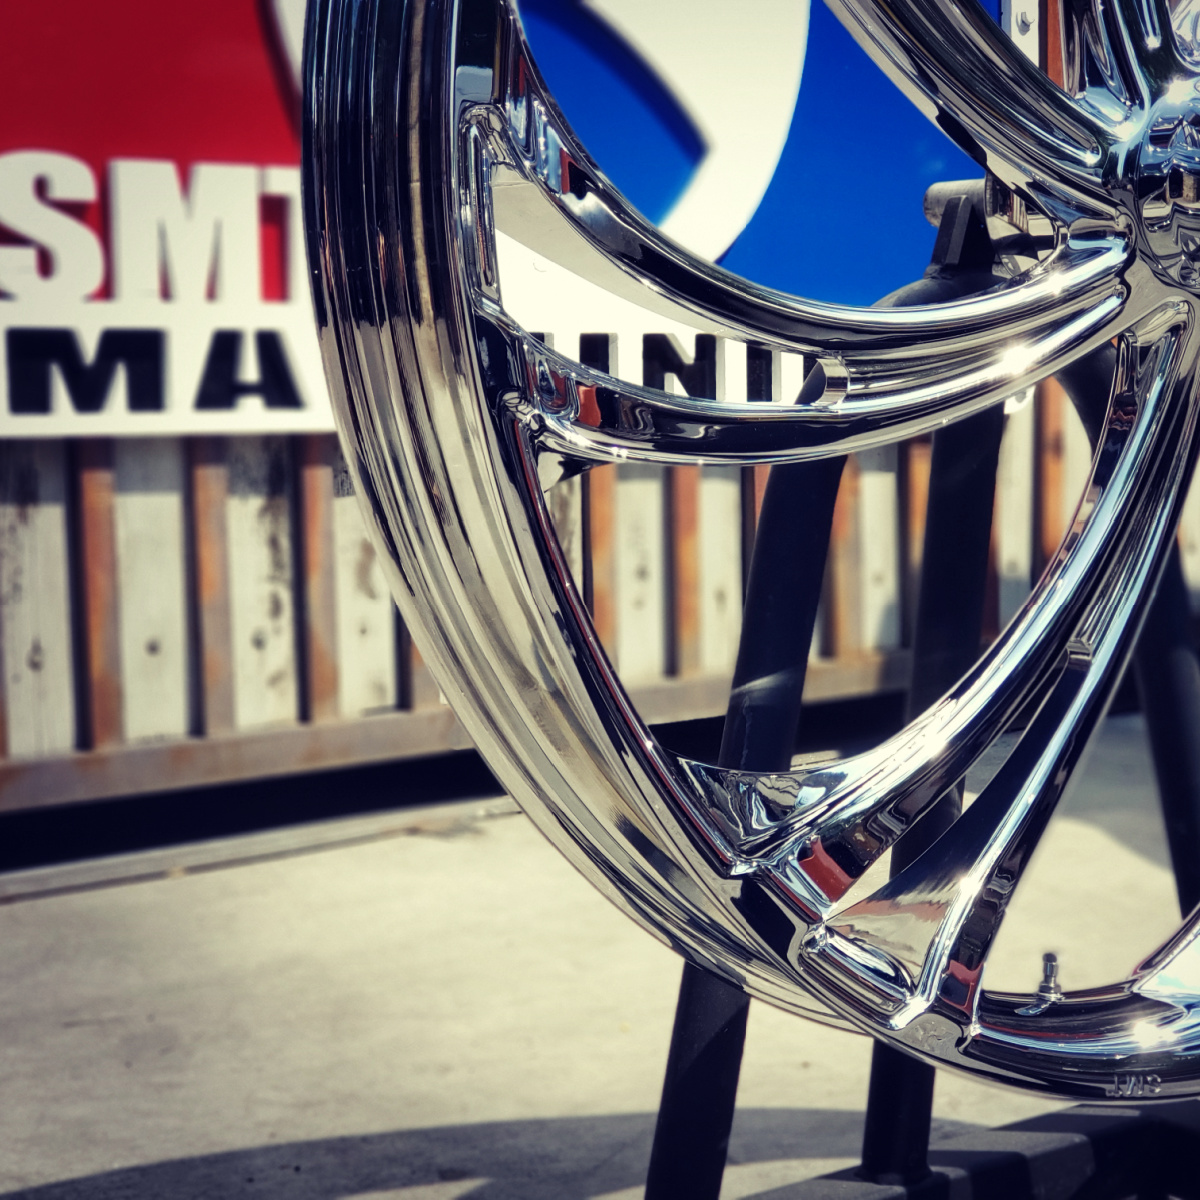 Chrome wheels are 10% OFF today
--------------------------🔥🔥🔥🔥-------
Over 100 Designs
#InterestFREE Financing Available
#AmericanMade
#PerfectFit Guarantee
#StructuralWarranty
#HassleFreeReturns
------🔥🔥---------------------------
& More at SMTmachining.com